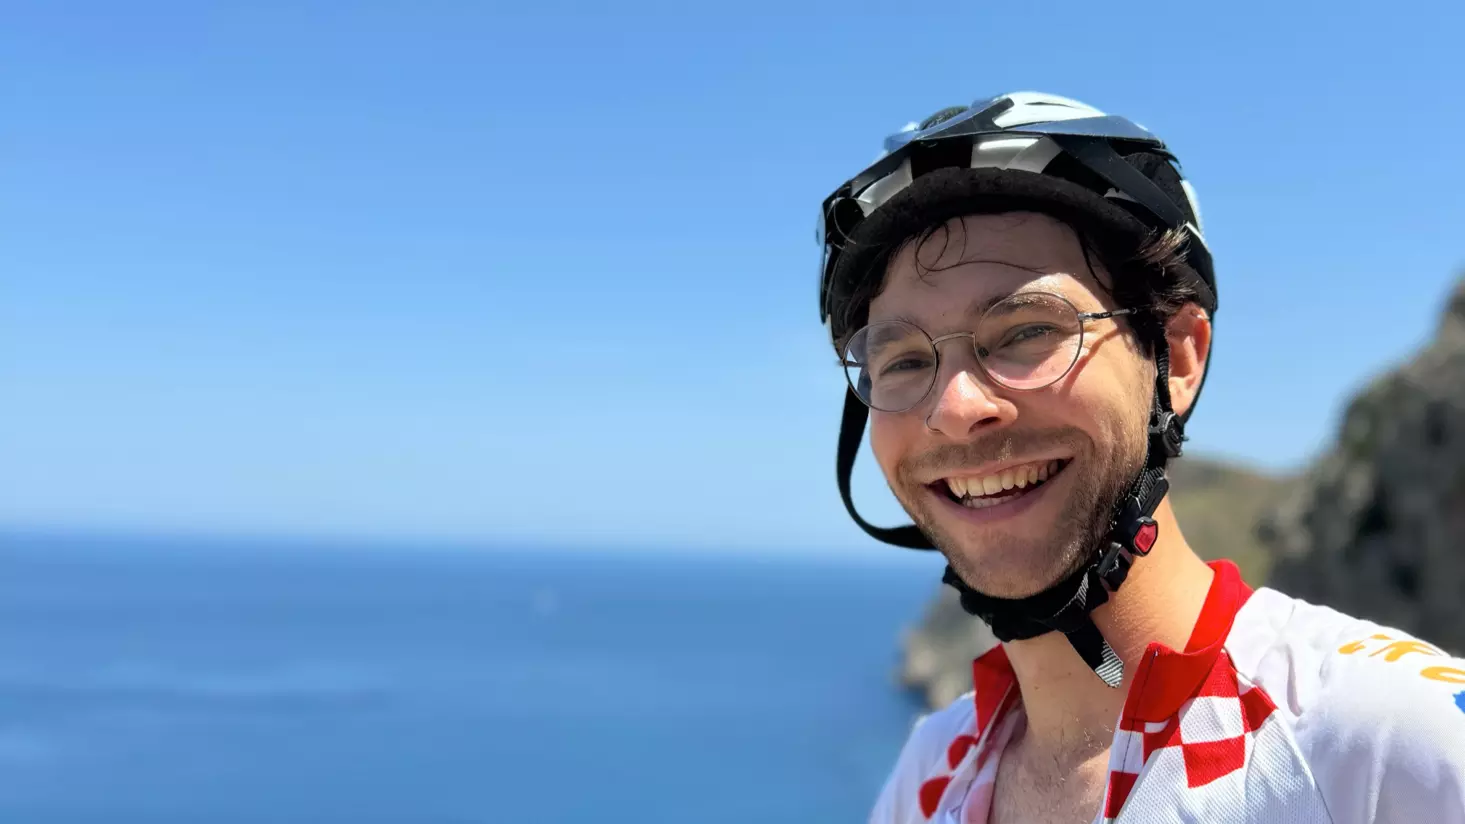 Max enjoying a cycling adventure in Spain